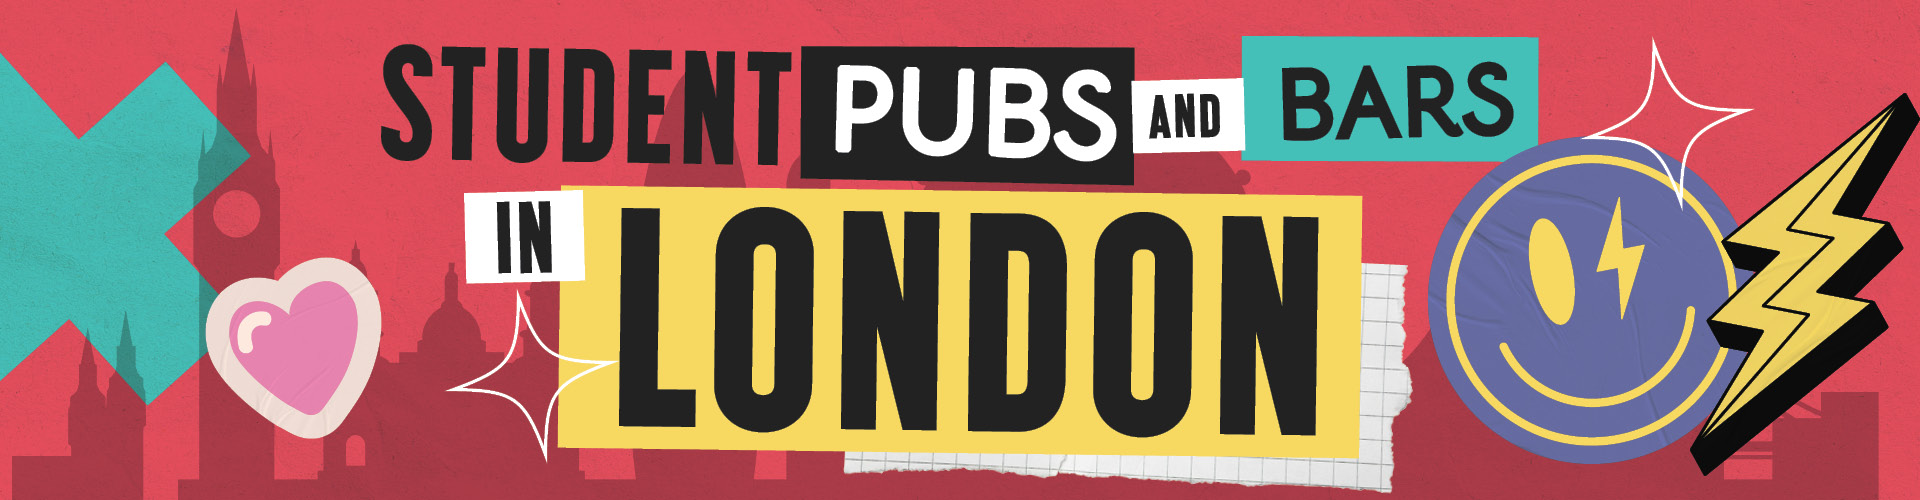 Student pubs and bars in London